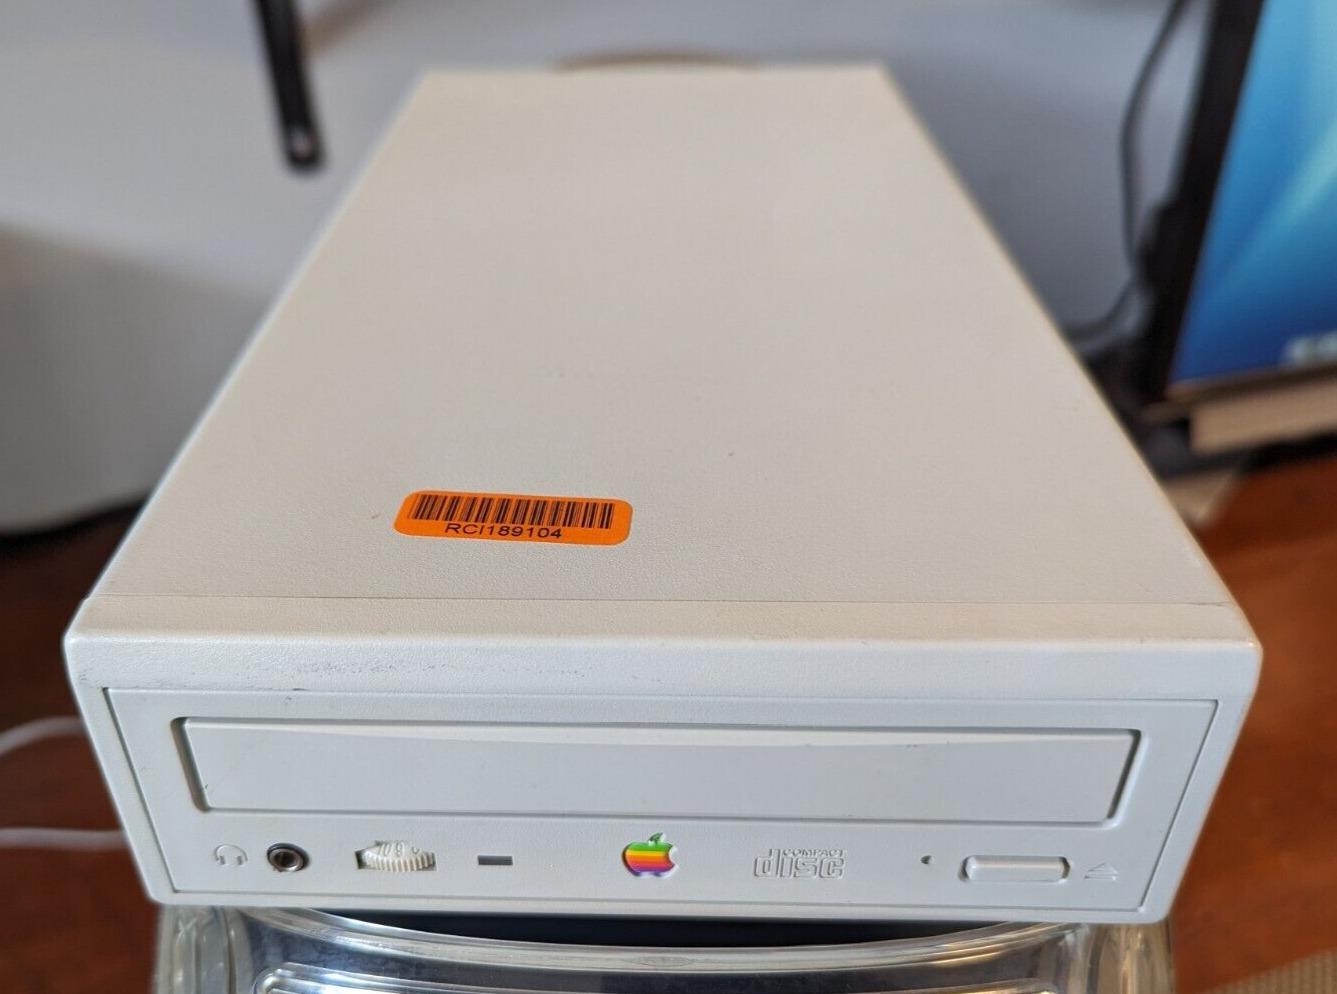 Apple AppleCD 300e Plus SCSI CD-ROM drive Model M2918 - Tested and Working